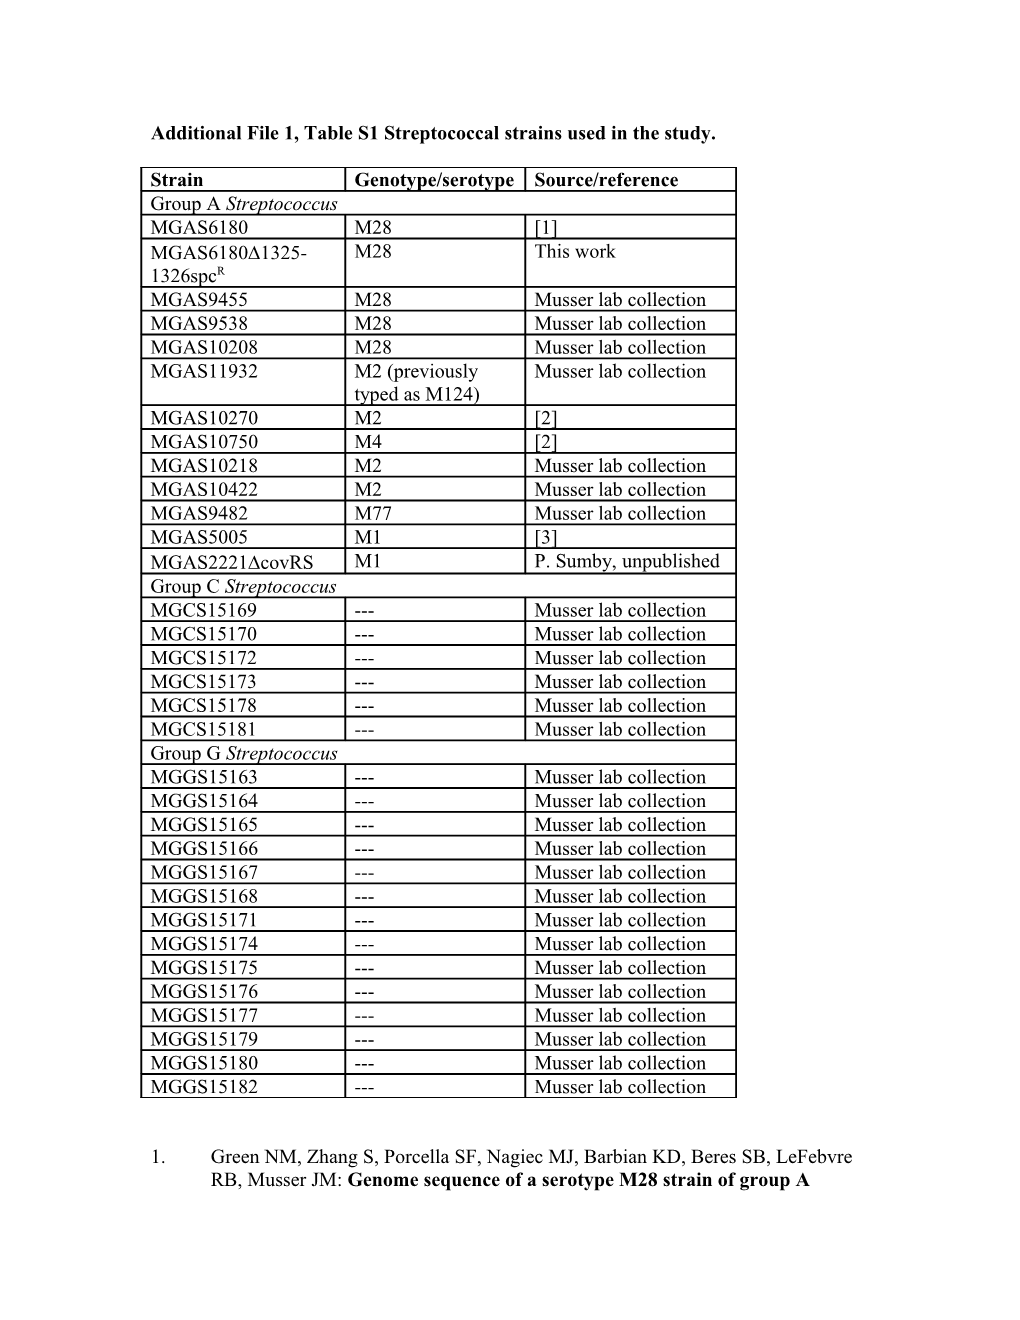 Supplemental Table S 1 Streptococcal Strains Used in the Study